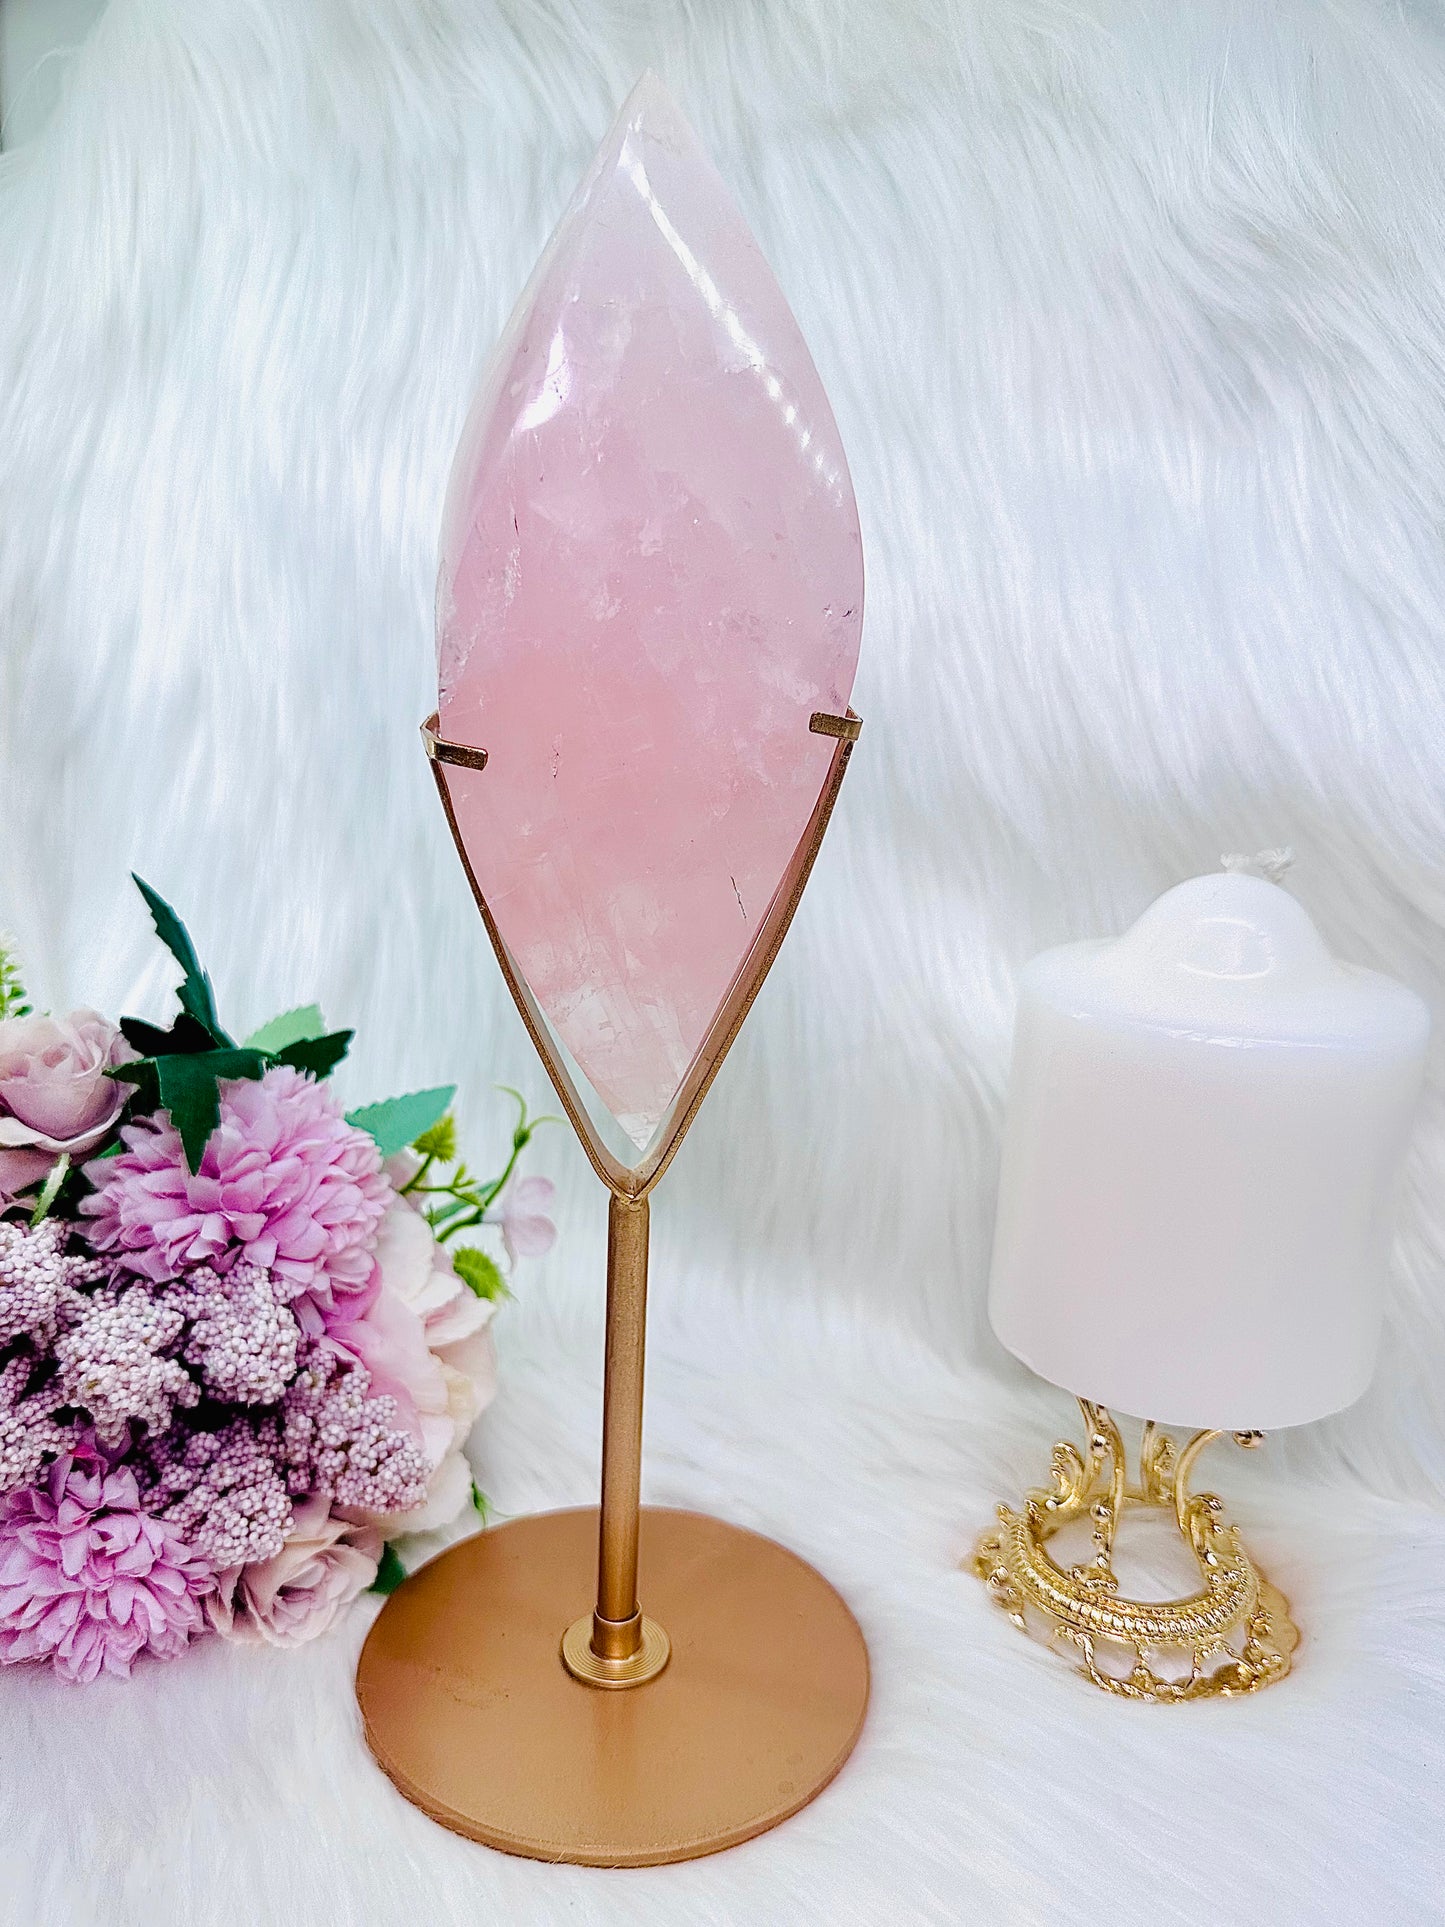 Classy & Absolutely Fabulous Large 28cm Rose Quartz Perfectly Carved Flame with Rainbows On Gold Stand 964grams ~ A Truly Stunning Piece